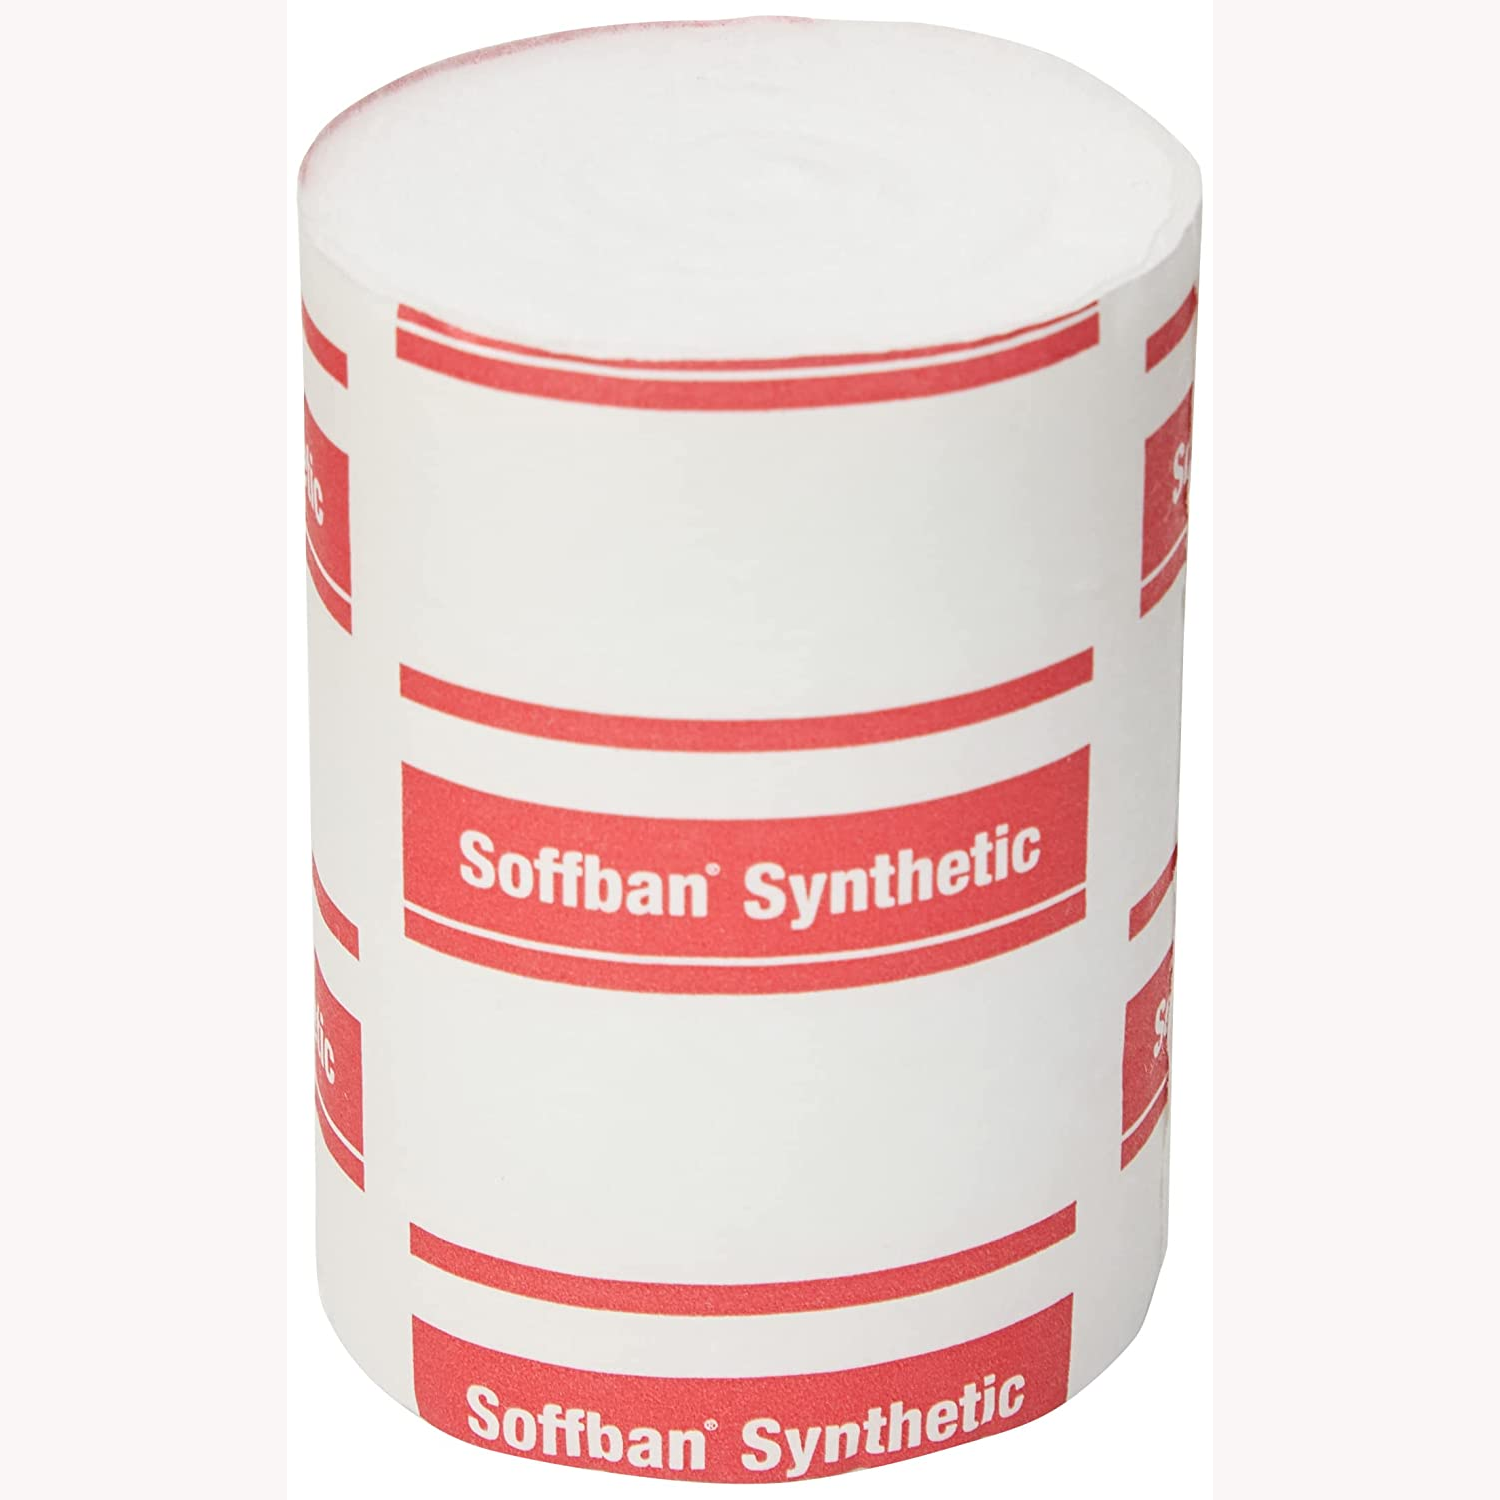 Soffban Synthetic Padding | 7.5cm x 2.7m | Pack of 12 (1)